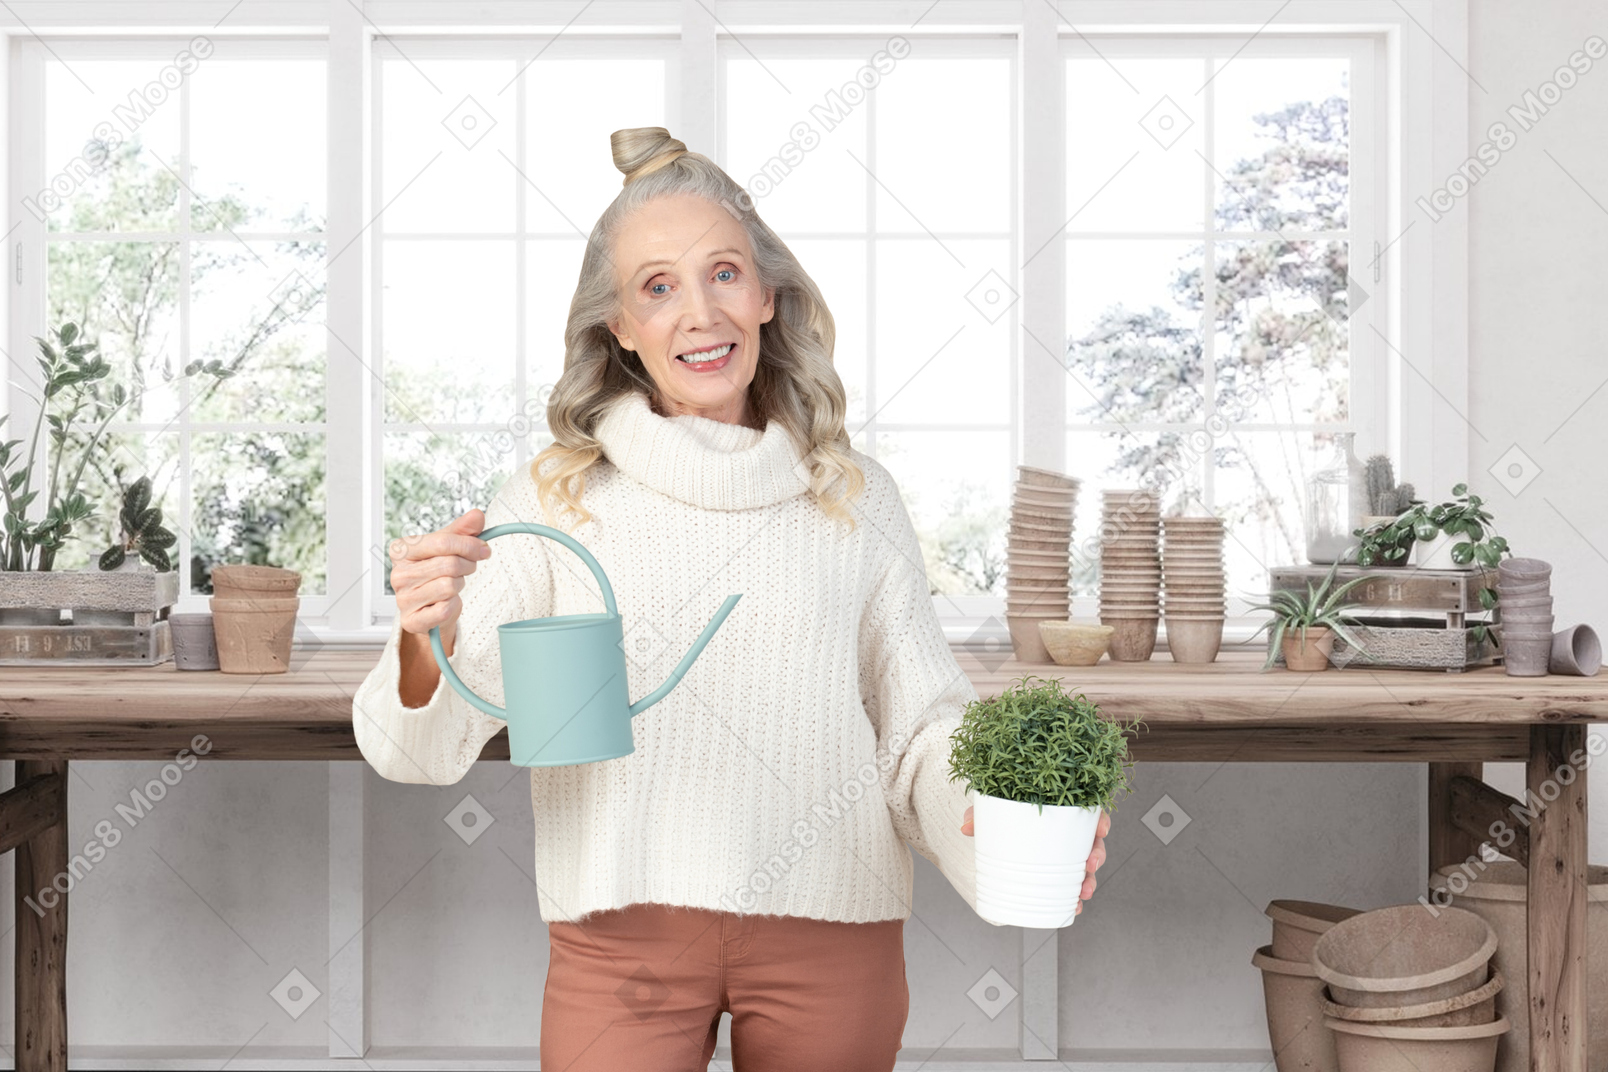 A woman holding a watering can and a potted plant